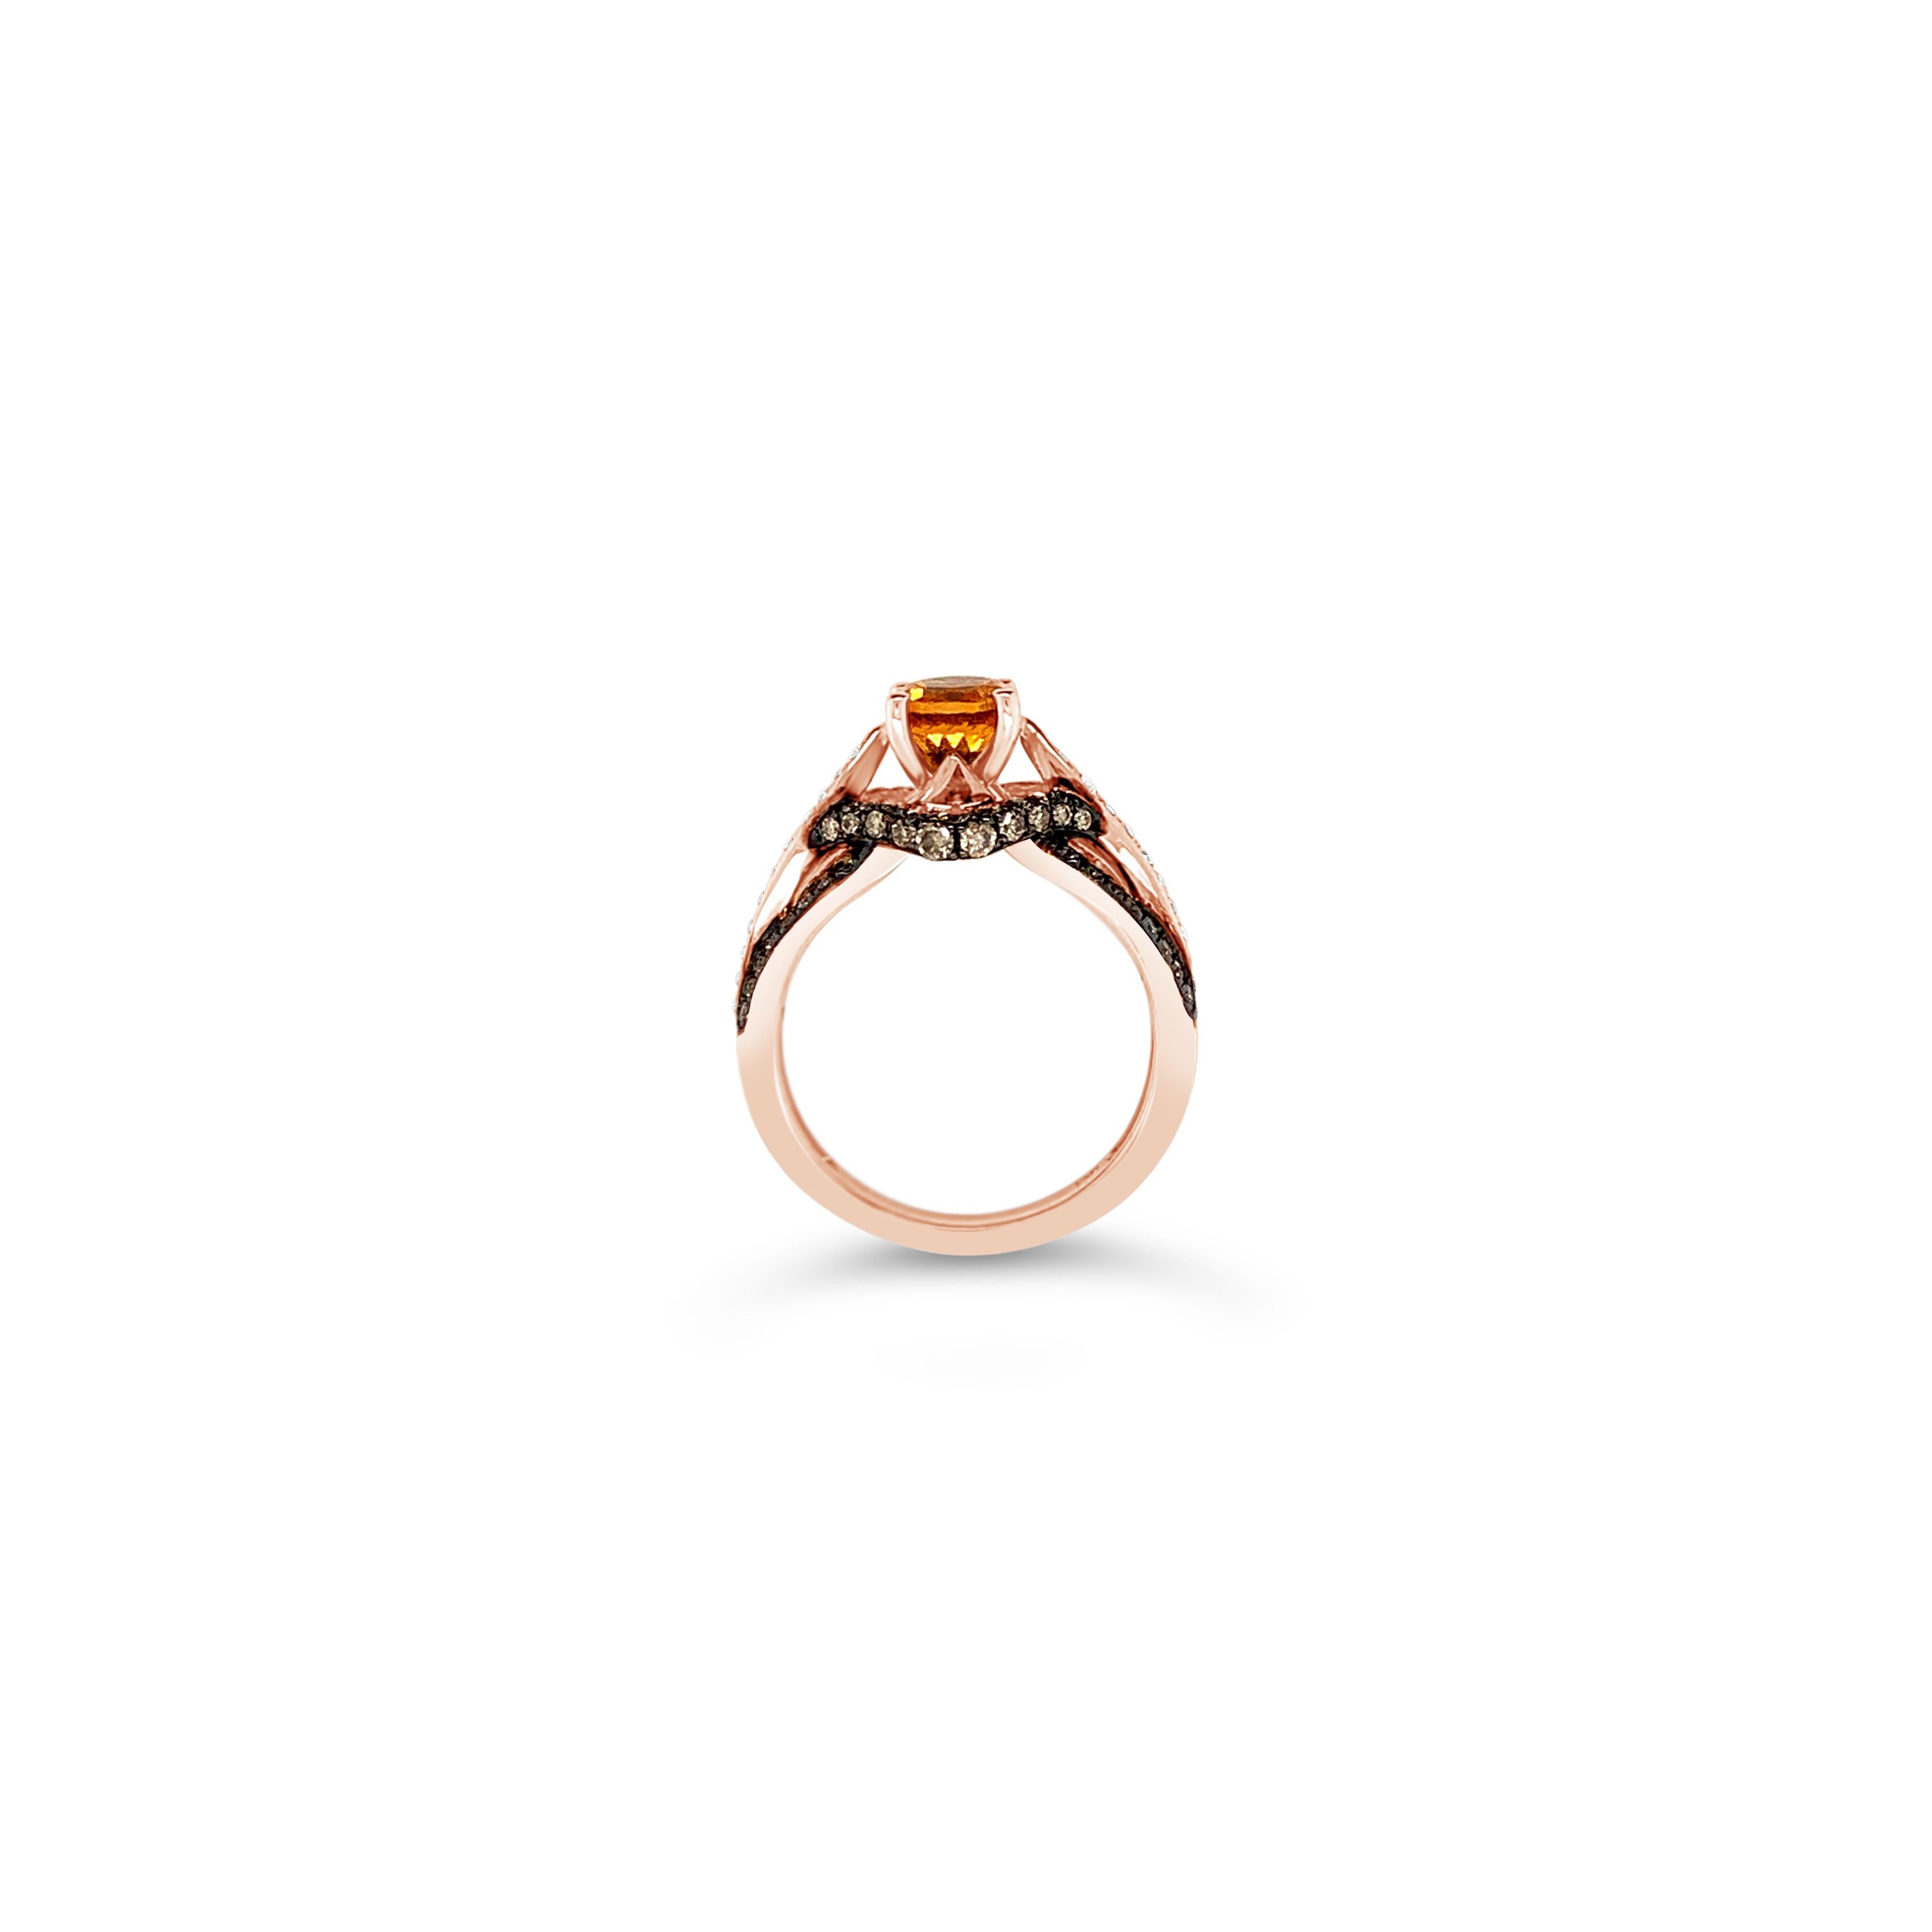 Le Vian Bridal® Ring featuring 1  1/5 cts. Spessartite, 1/2 cts. Chocolate Diamonds® , 1/6 cts. Vanilla Diamonds®  set in 14K Strawberry Gold®
